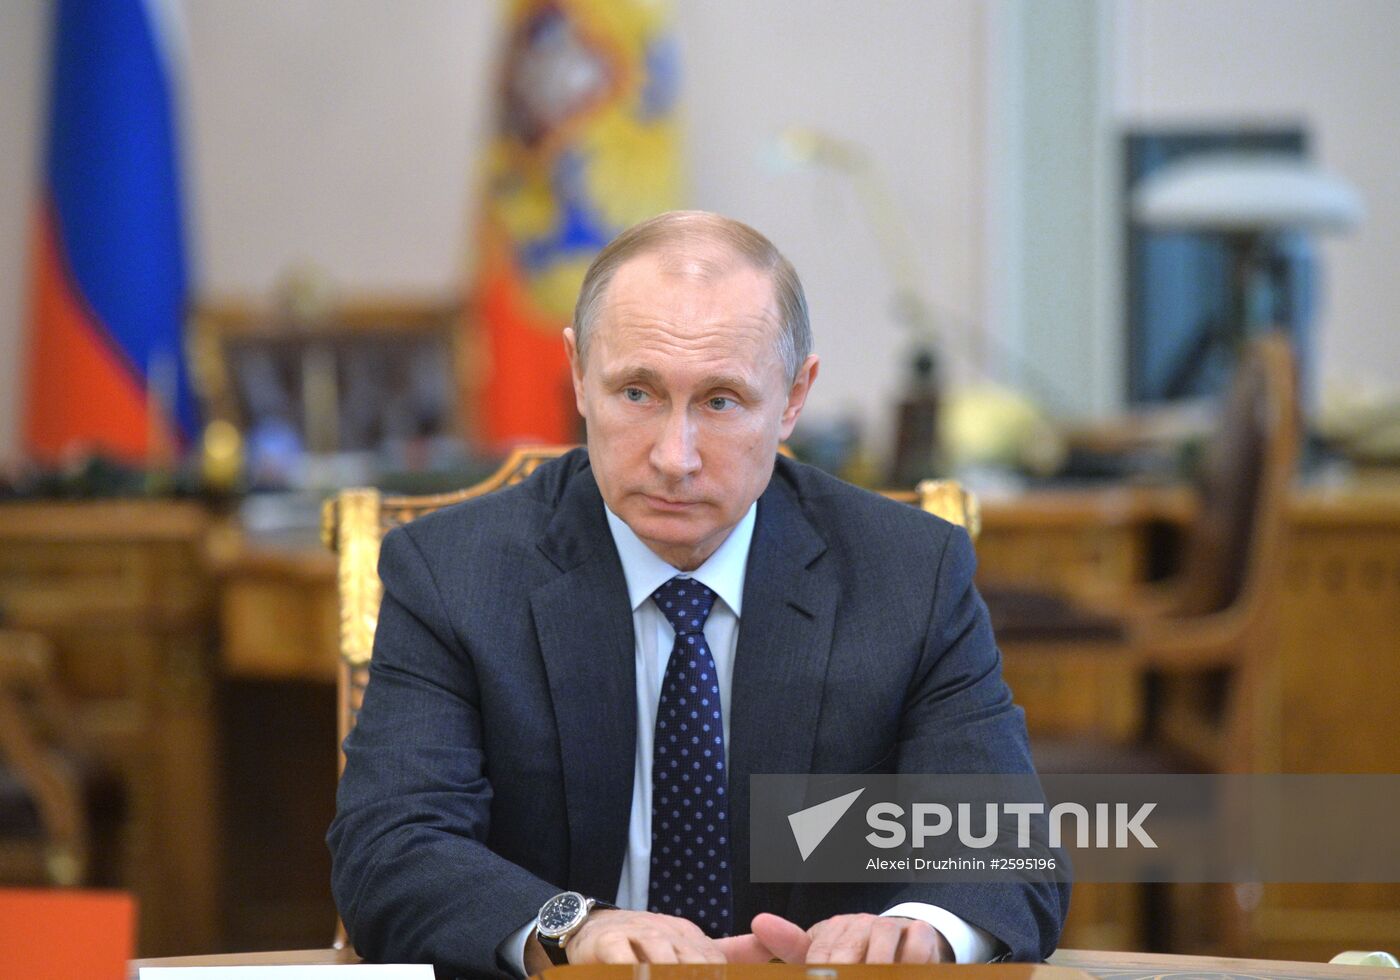 President Putin chairs meeting with Russia's Security Council permanent members